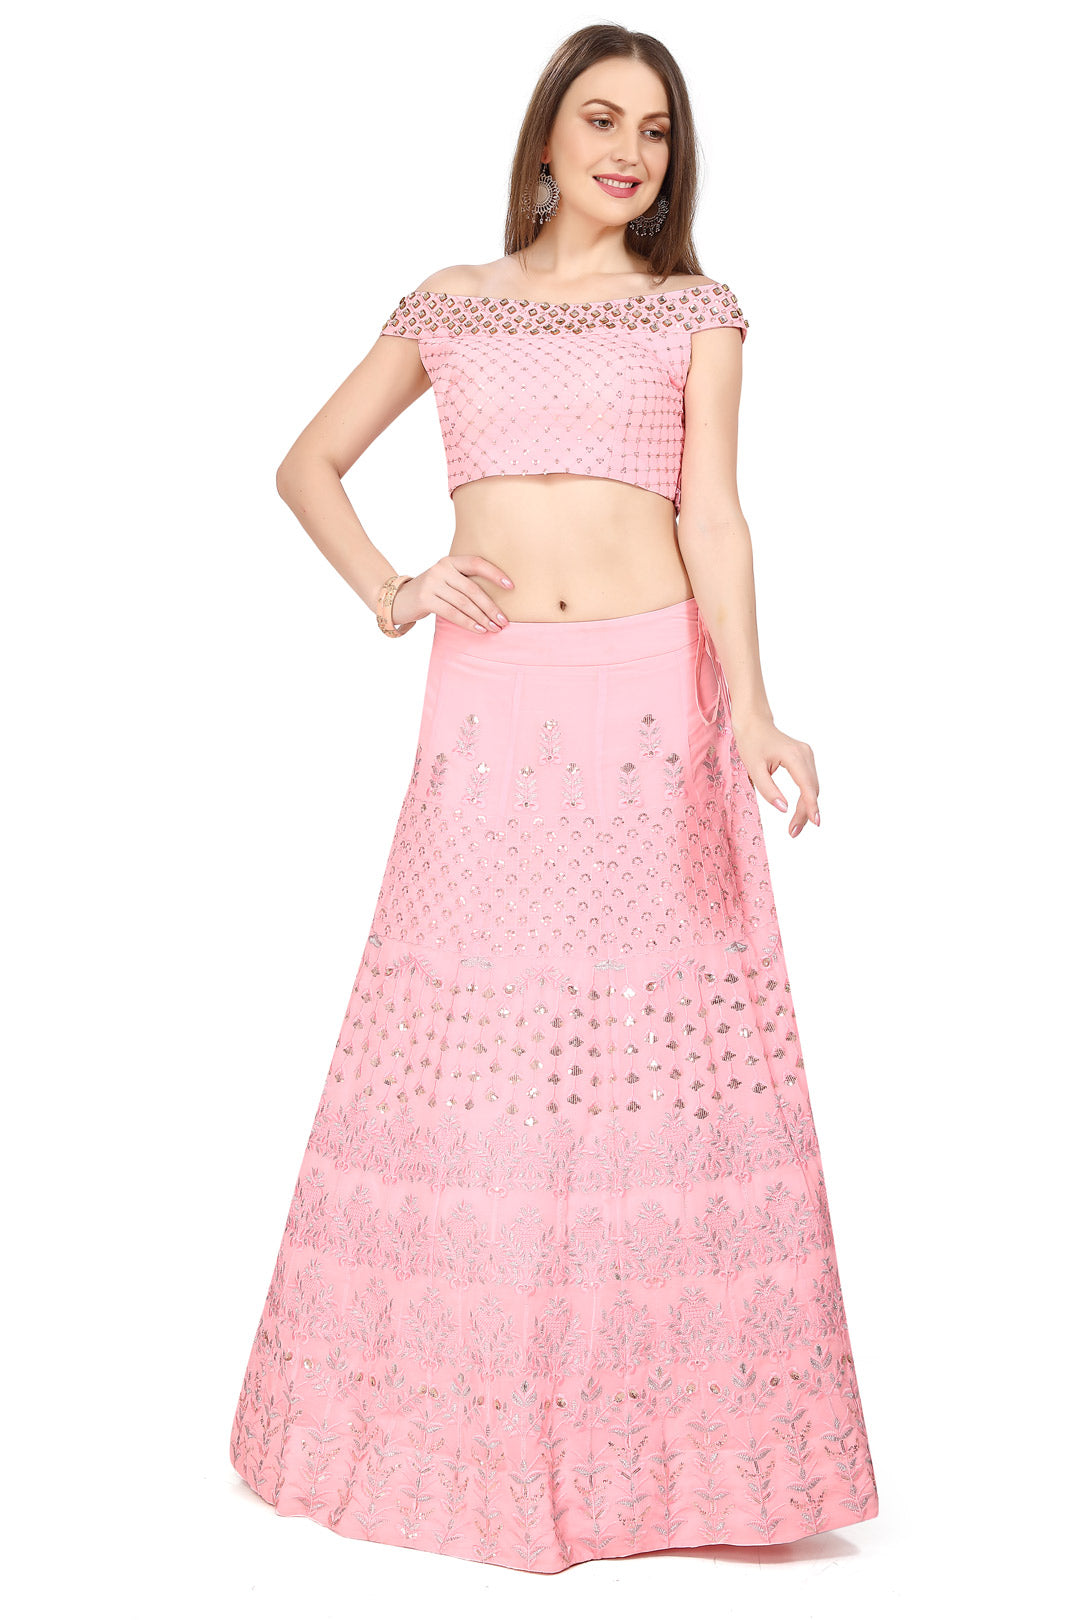 Pink Lucknowi Embroidered Monochrome Lehenga Set-AariAmi Boutique